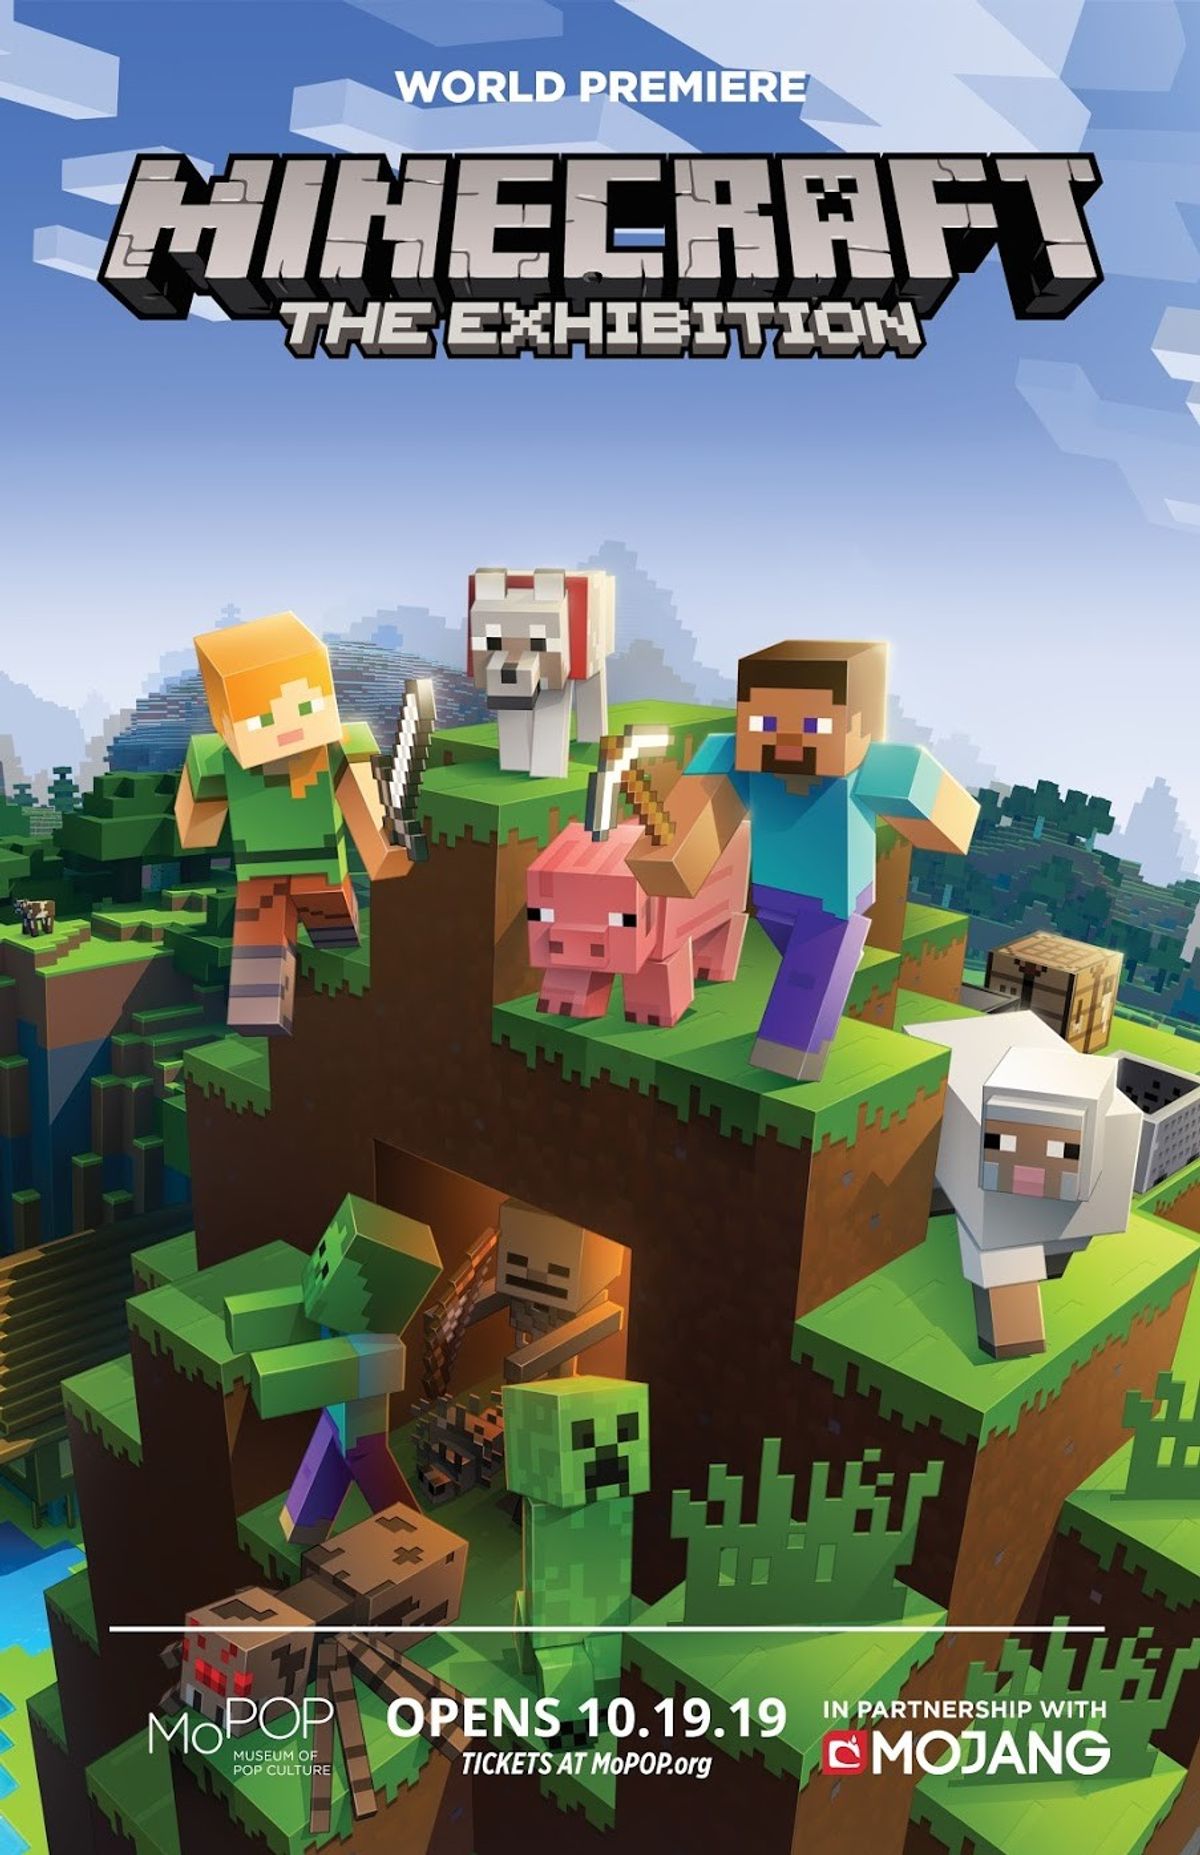 Dezelfde Poging Dalset Minecraft: The Exhibition at Museum of Pop Culture (MoPOP) in Seattle, WA -  Thu - Mon, through Apr 18, 2021 - EverOut Seattle